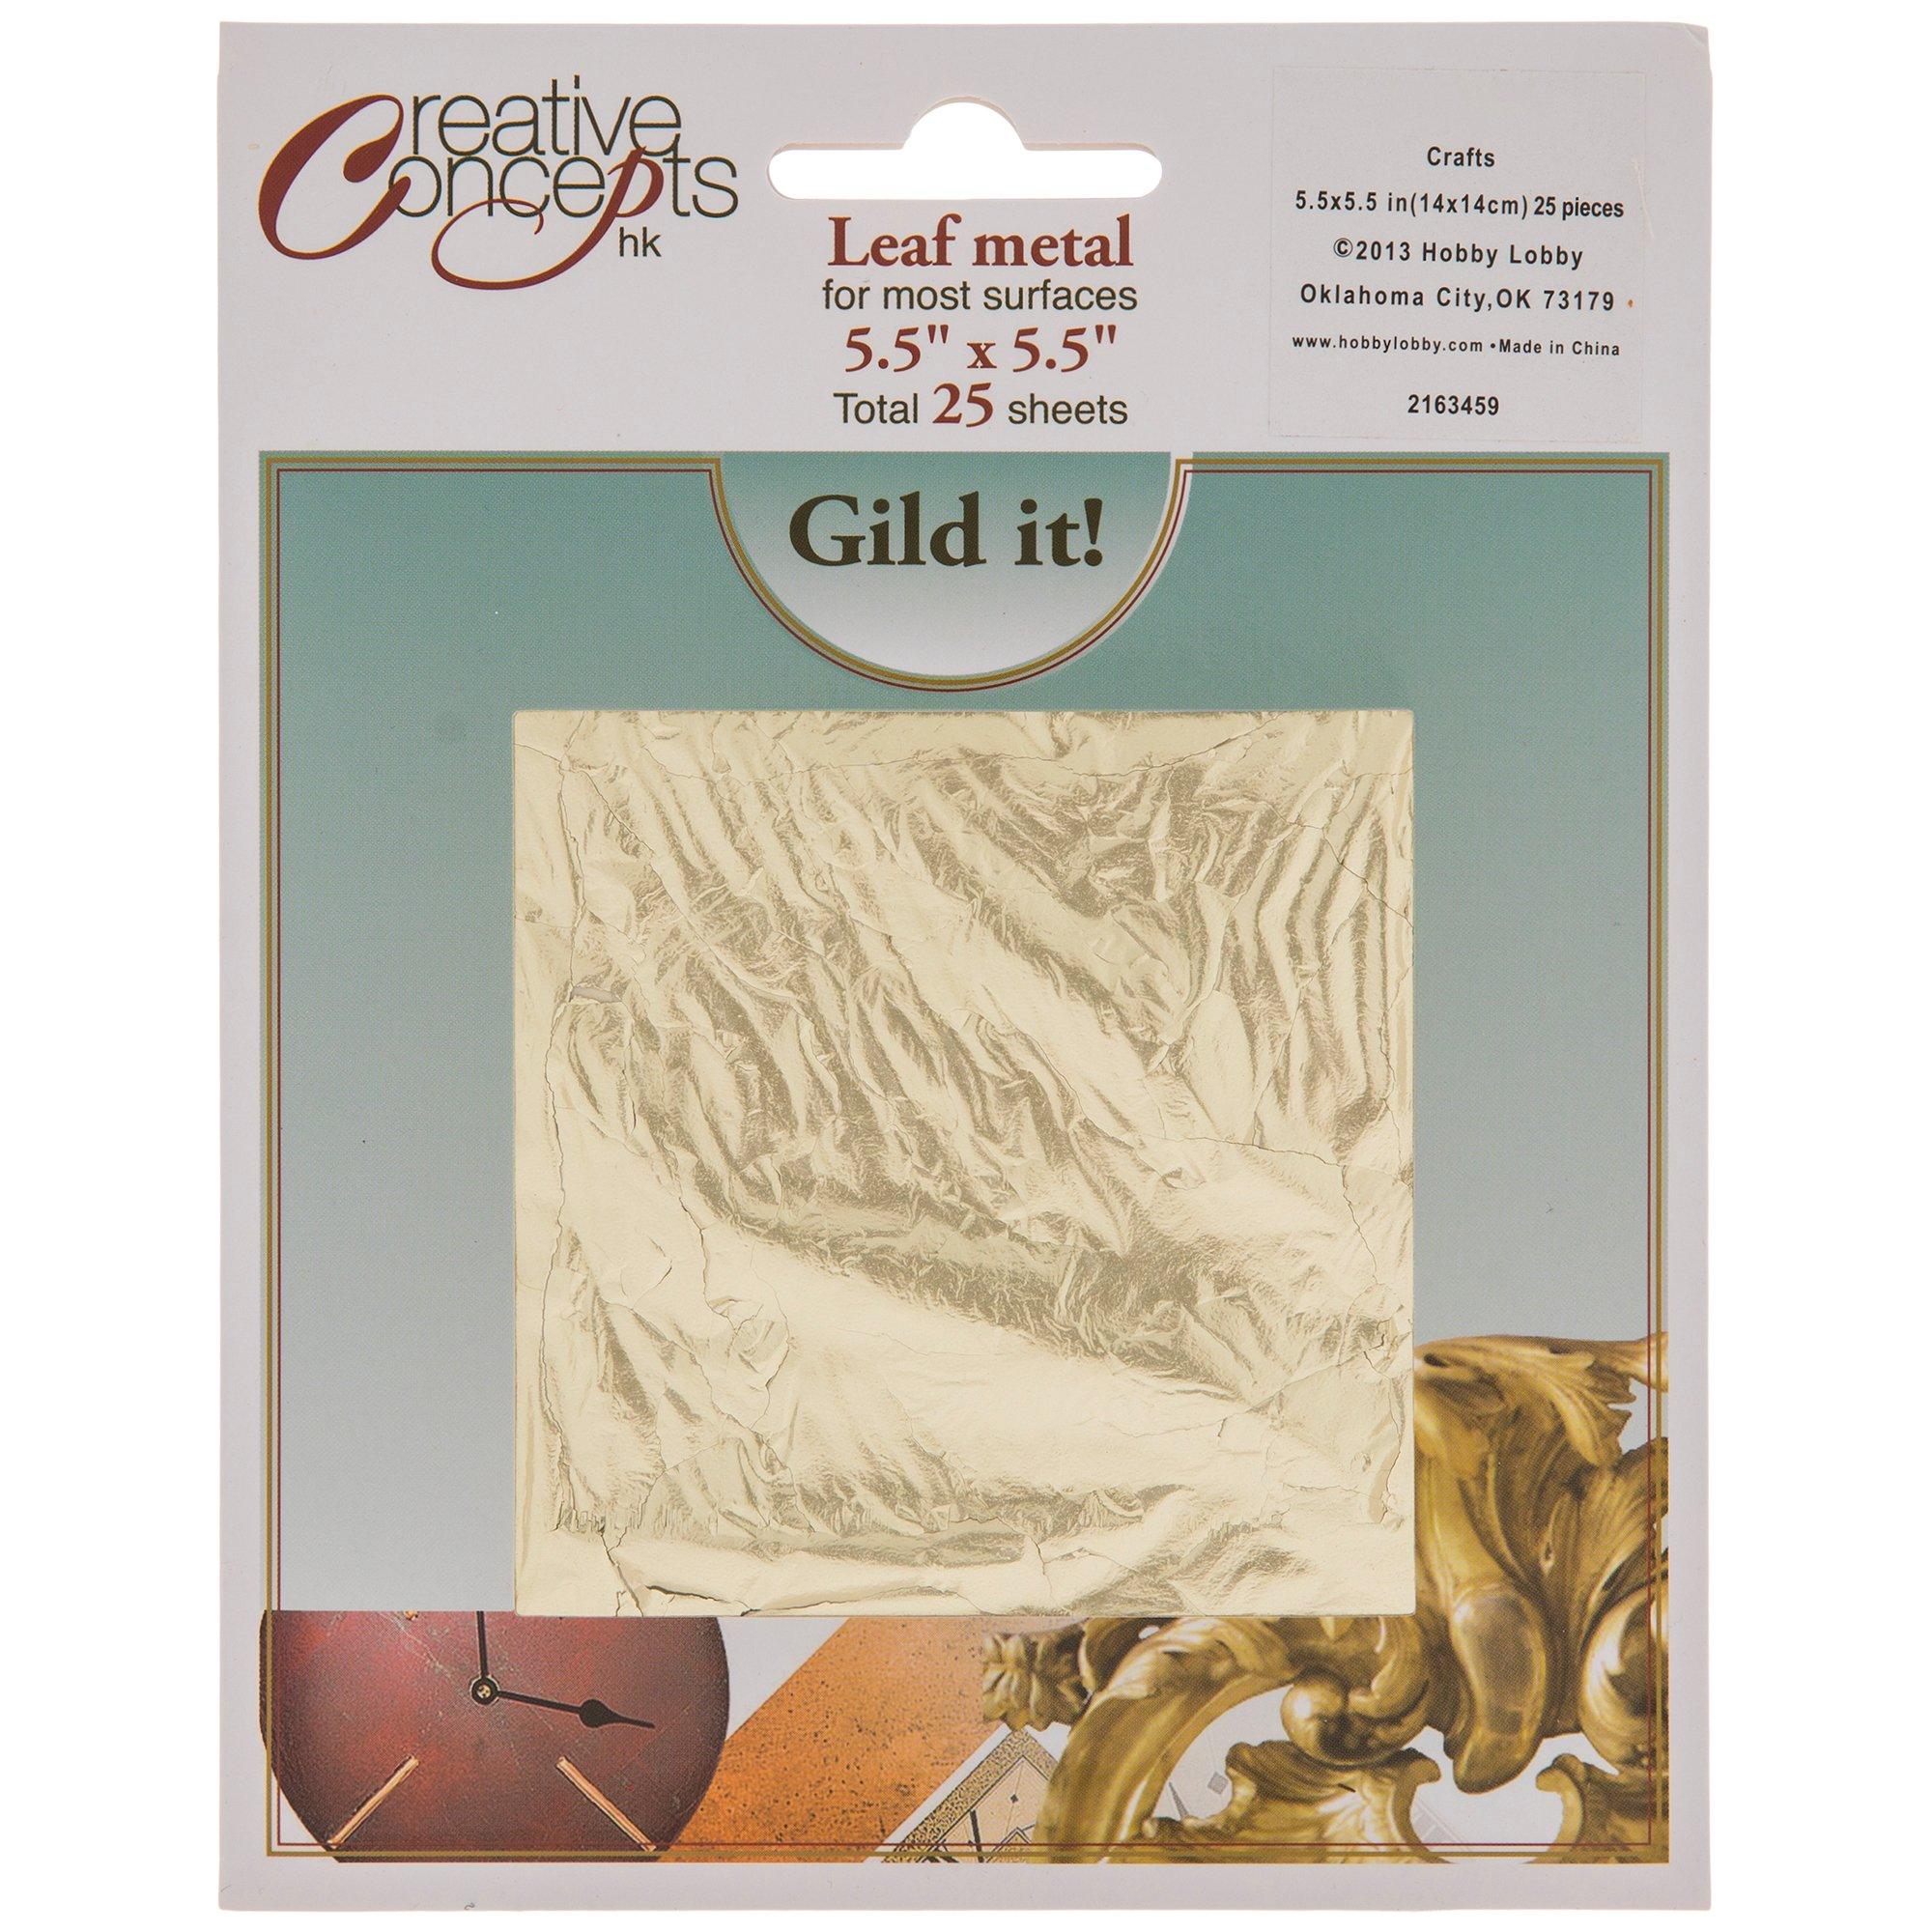 6 Packs: 25 ct. (150 total) Premium Silver Leaf Sheets by Craft Smart®